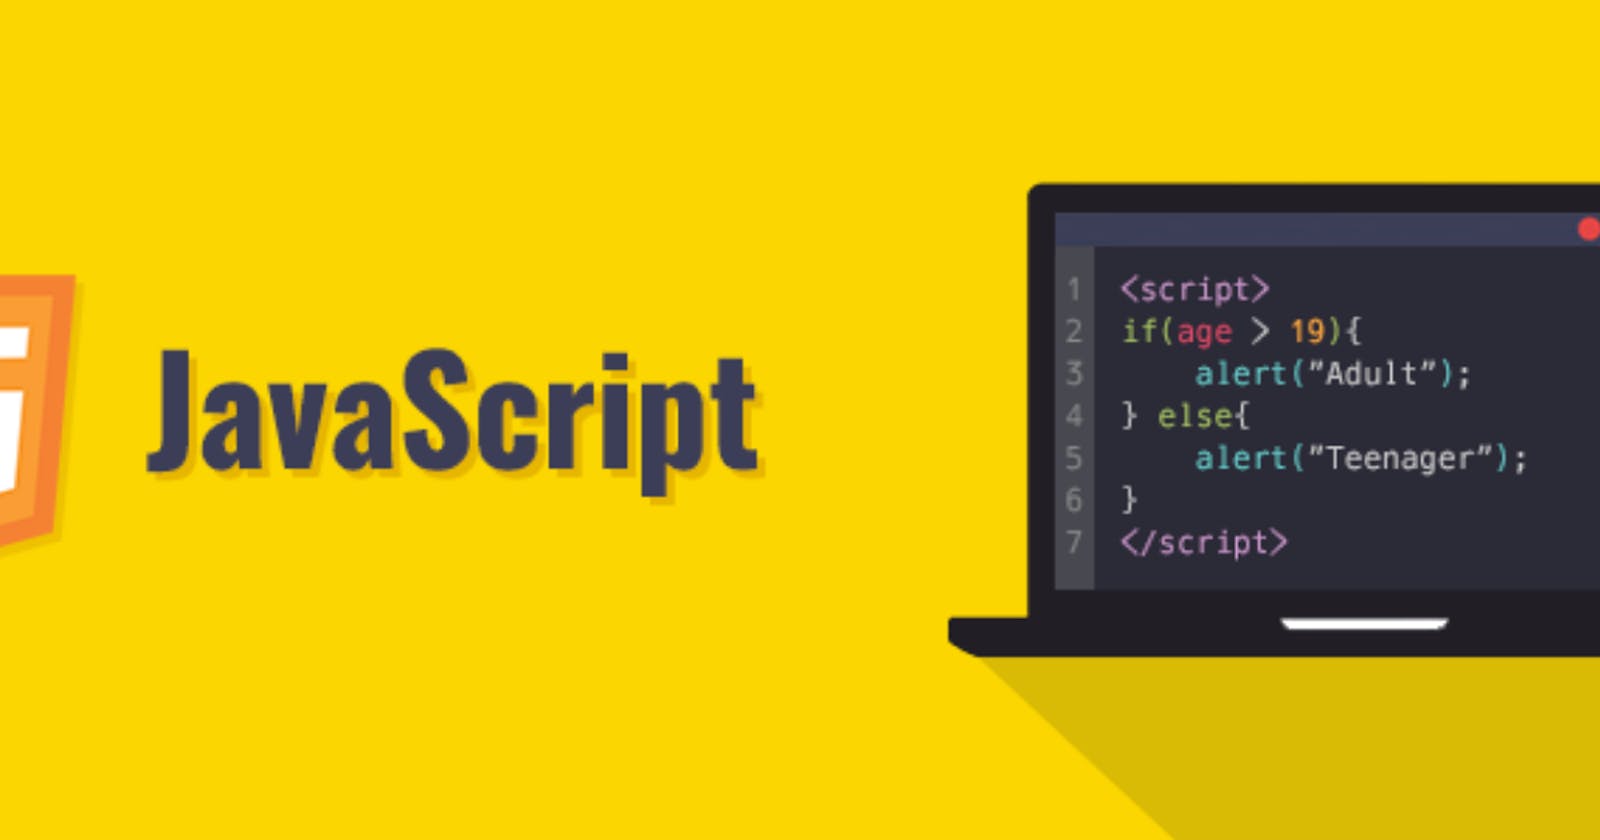 Object, property, and method in JavaScript